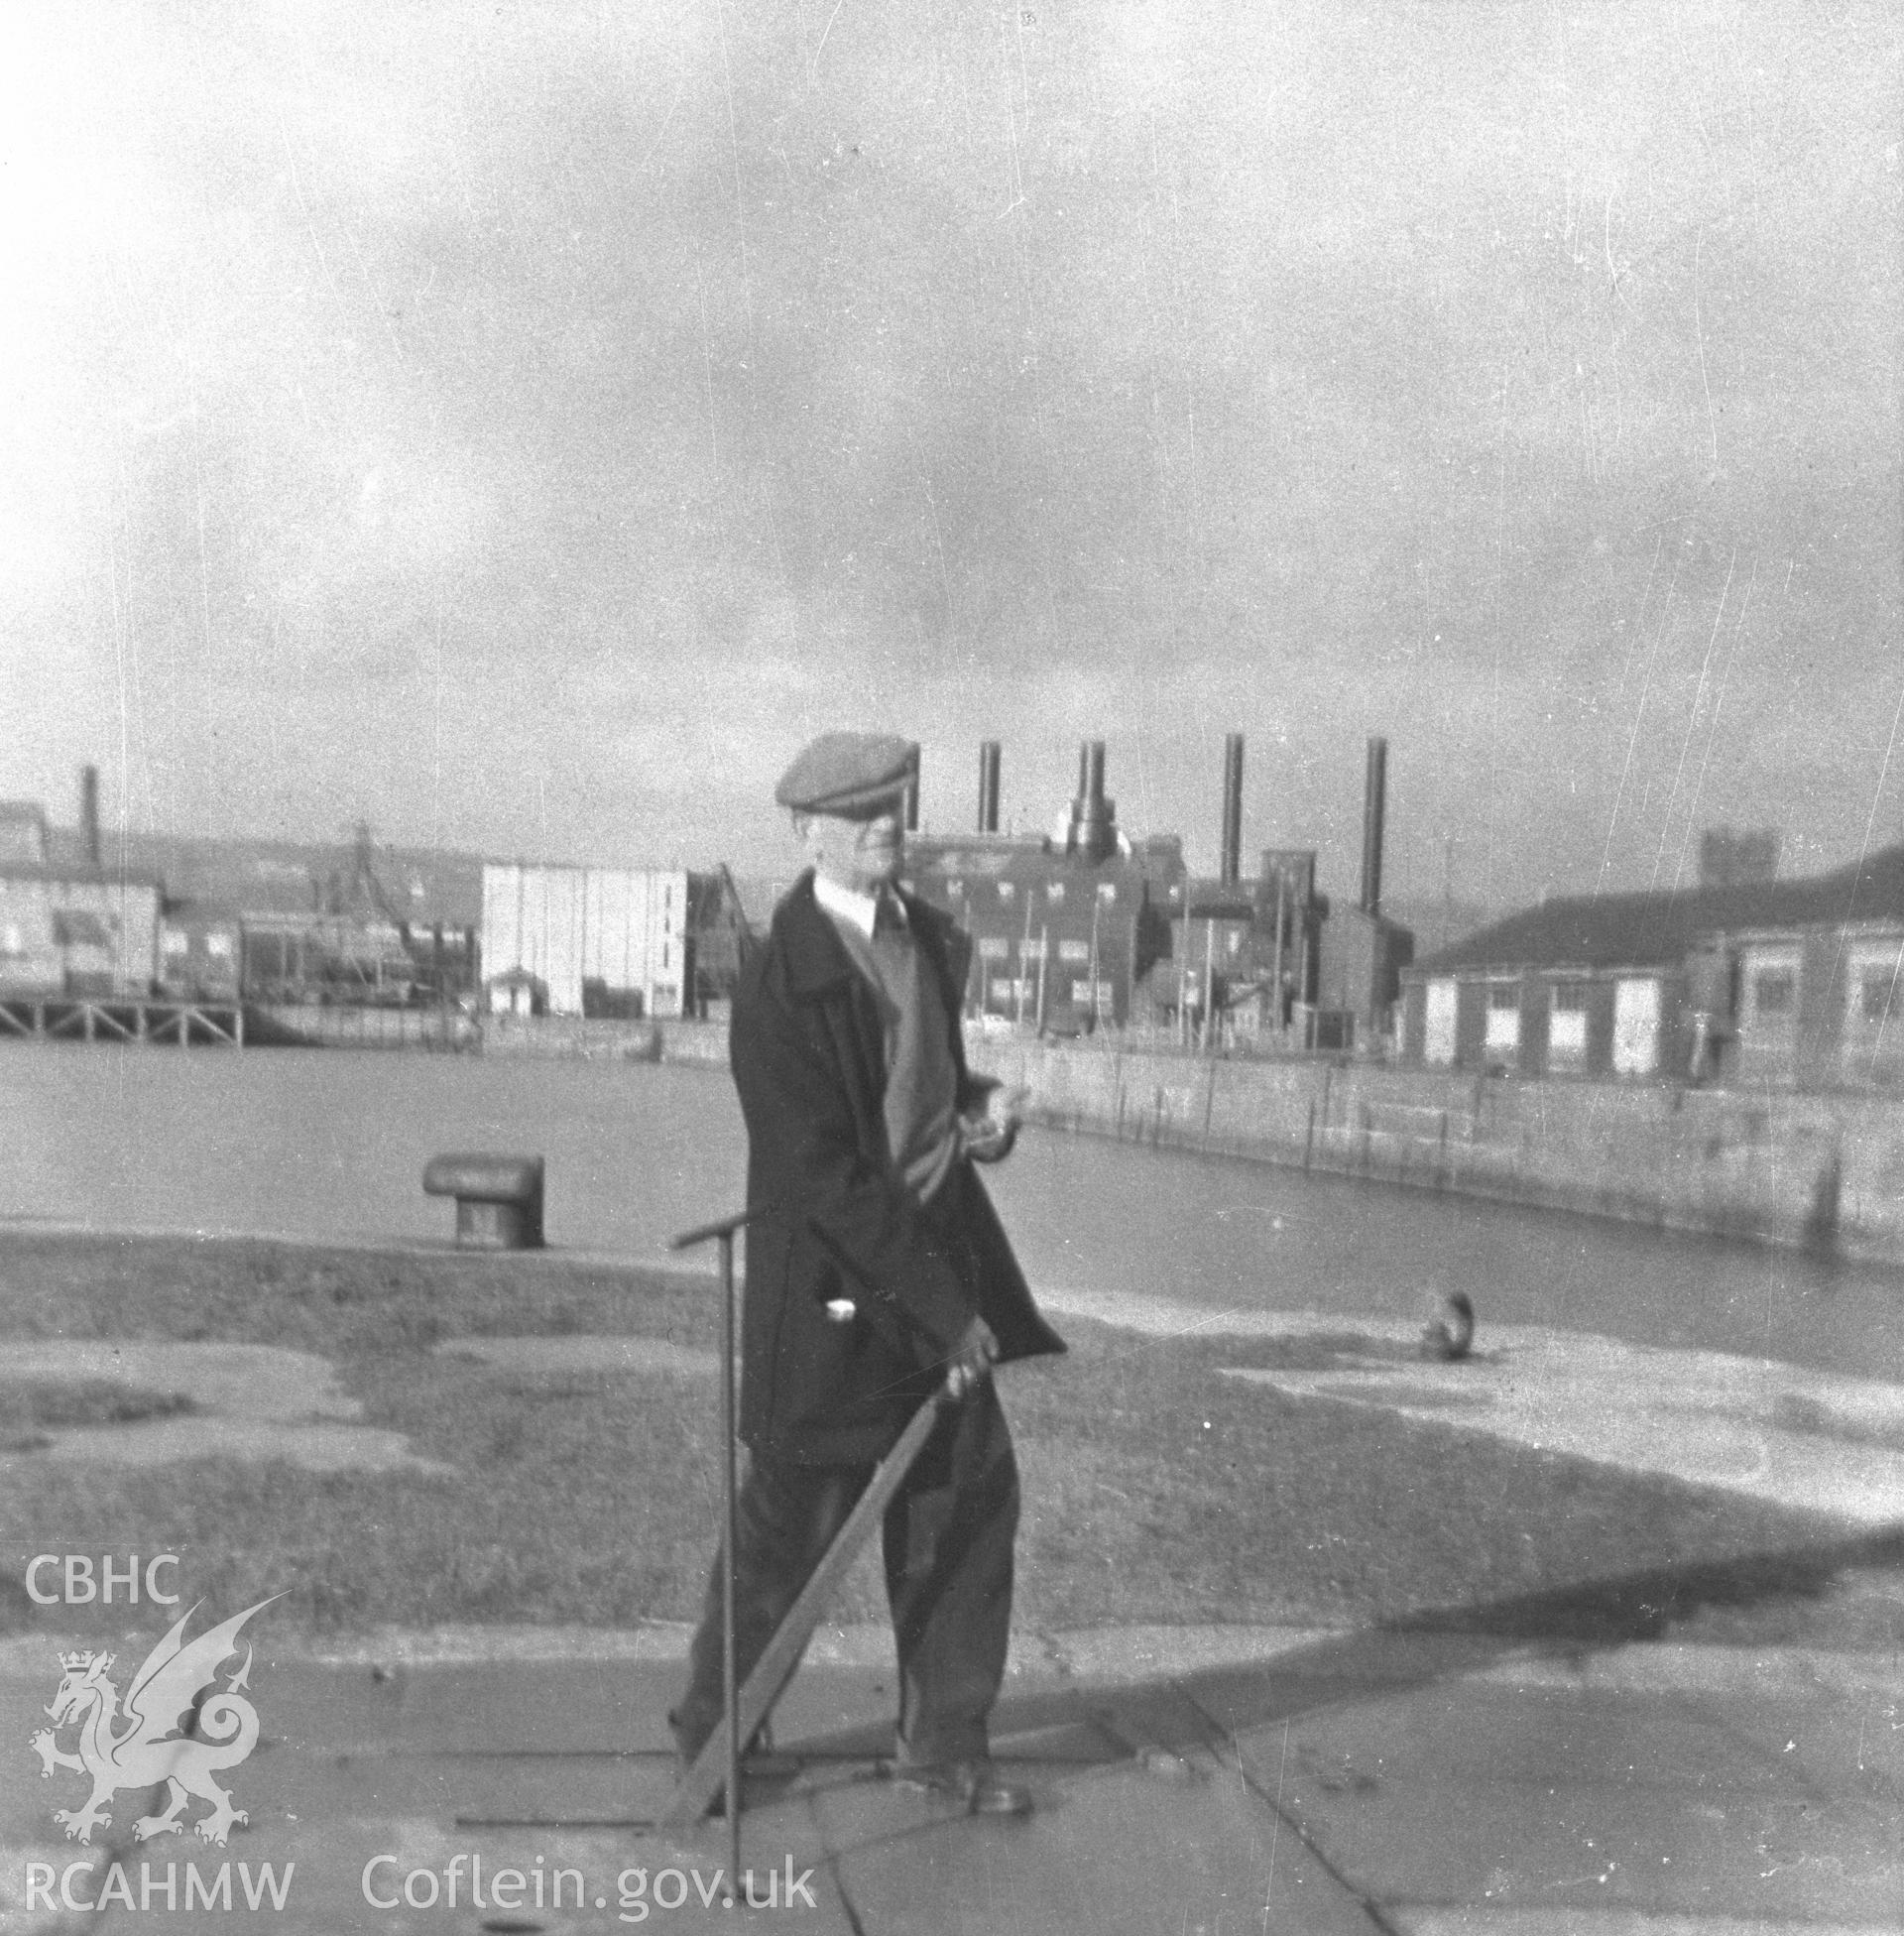 Black and white acetate negative showing Llanelli Power Station with figure in foreground.